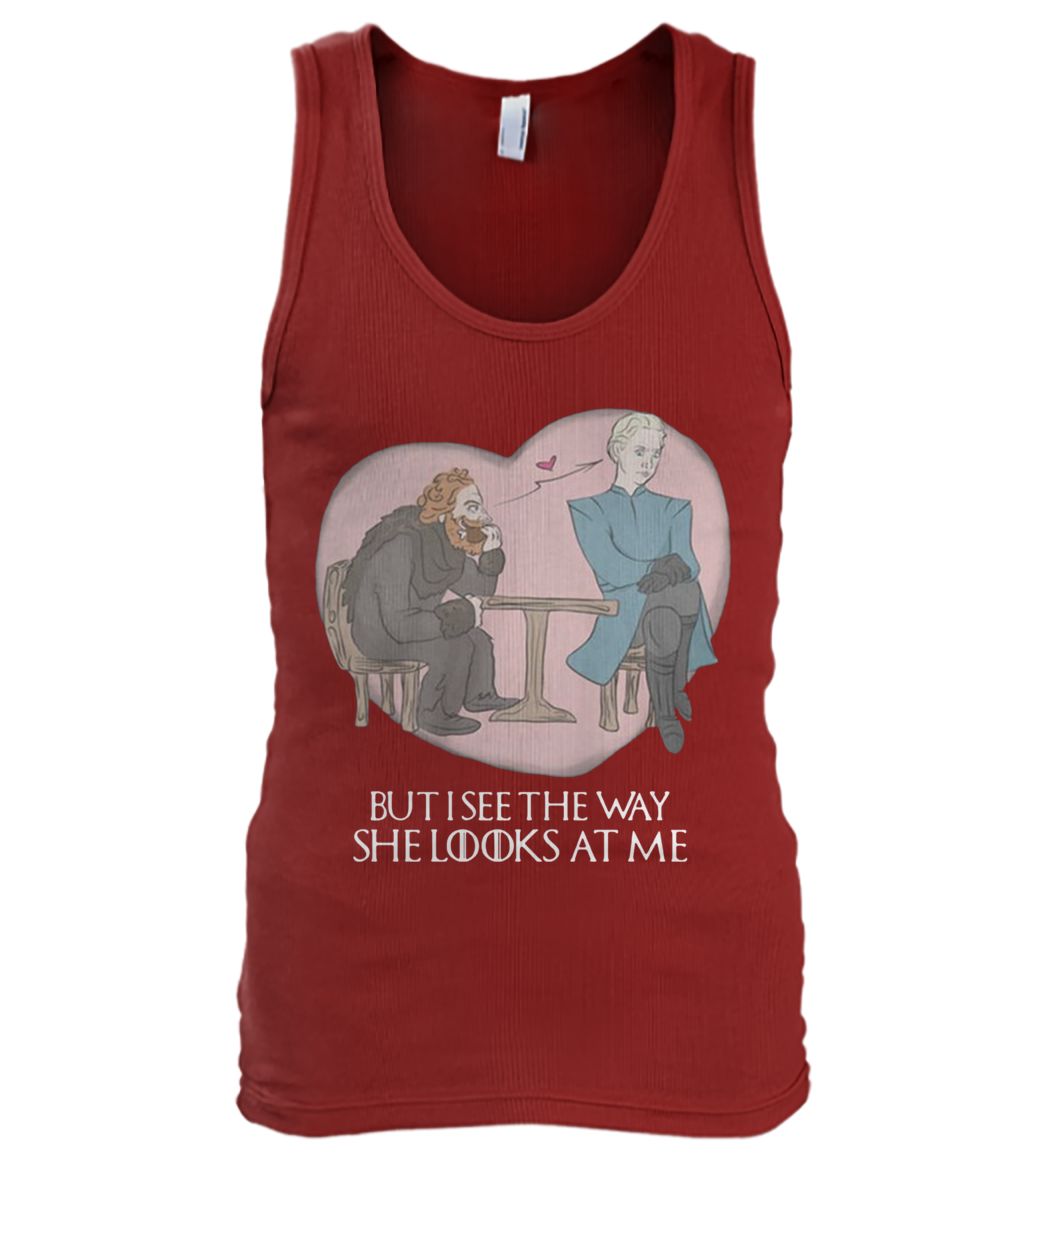 Tormund and brienne but I see the way she looks at me game of thrones men's tank top